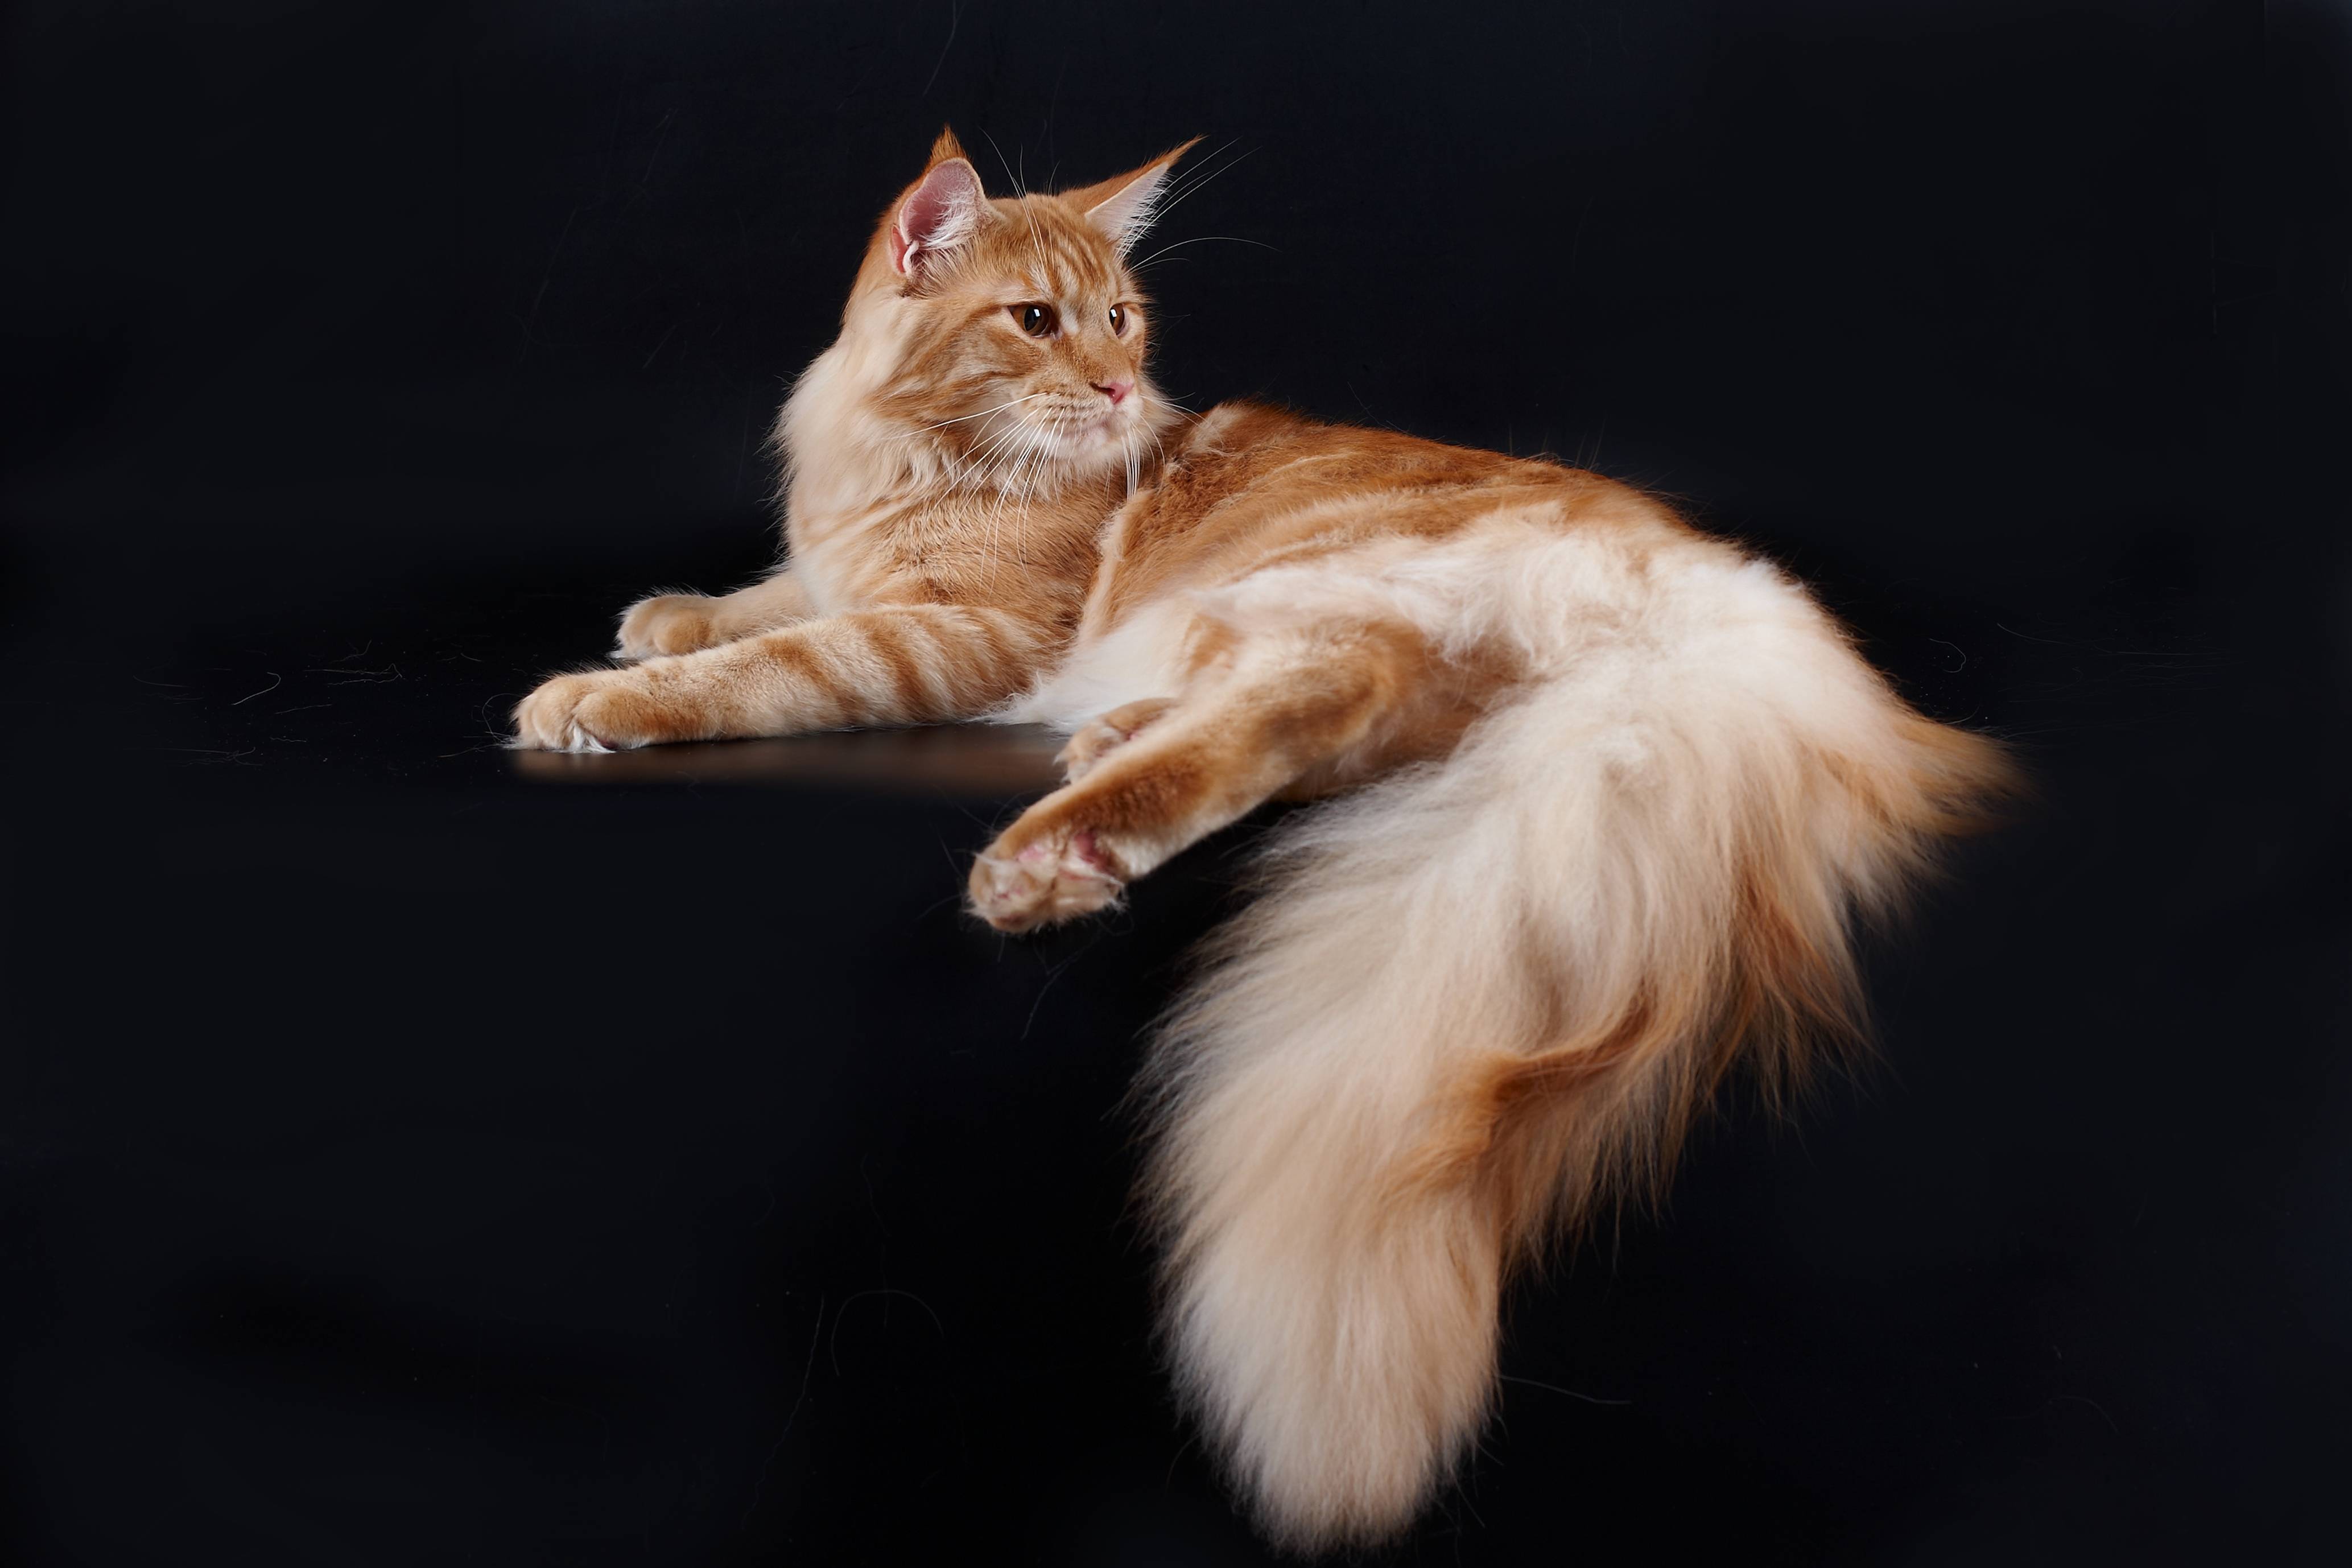 Have You Seen A Maine Coon Cat? - Systeams